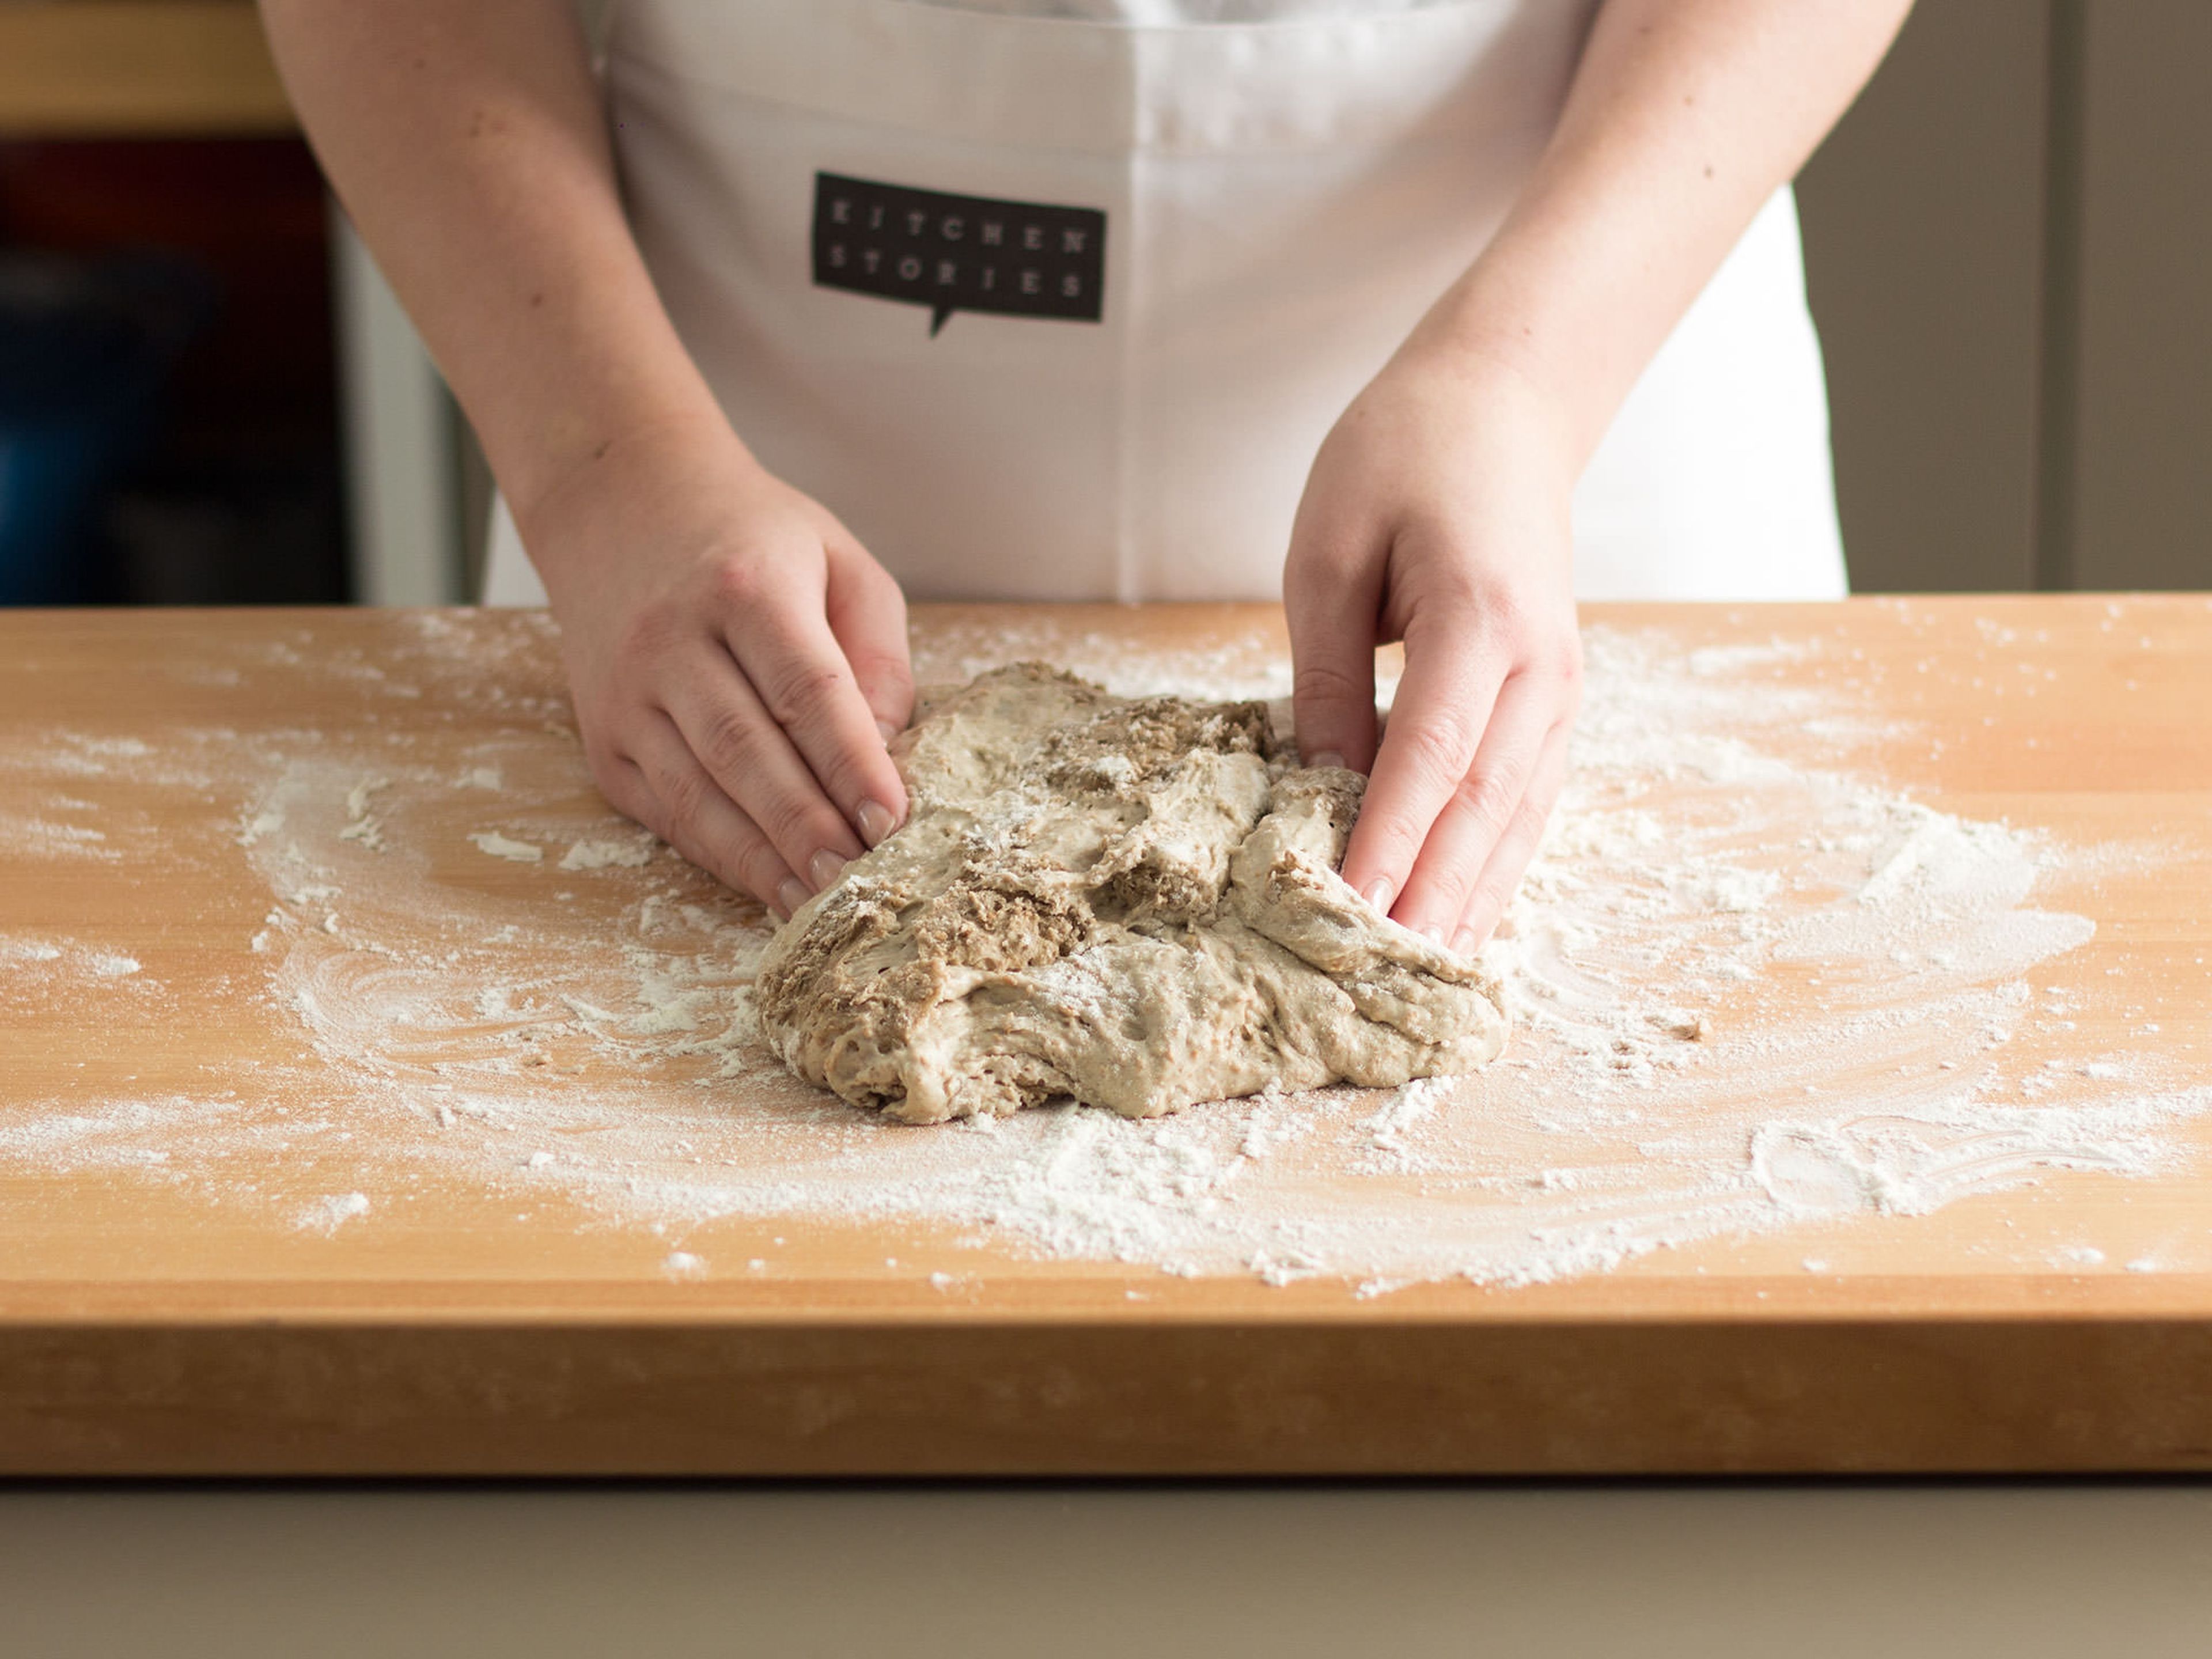 Preheat oven to 250°C/480°F. Generously flour the work surface and slide the dough out of the bowl. Fold each edge of the dough towards the middle.